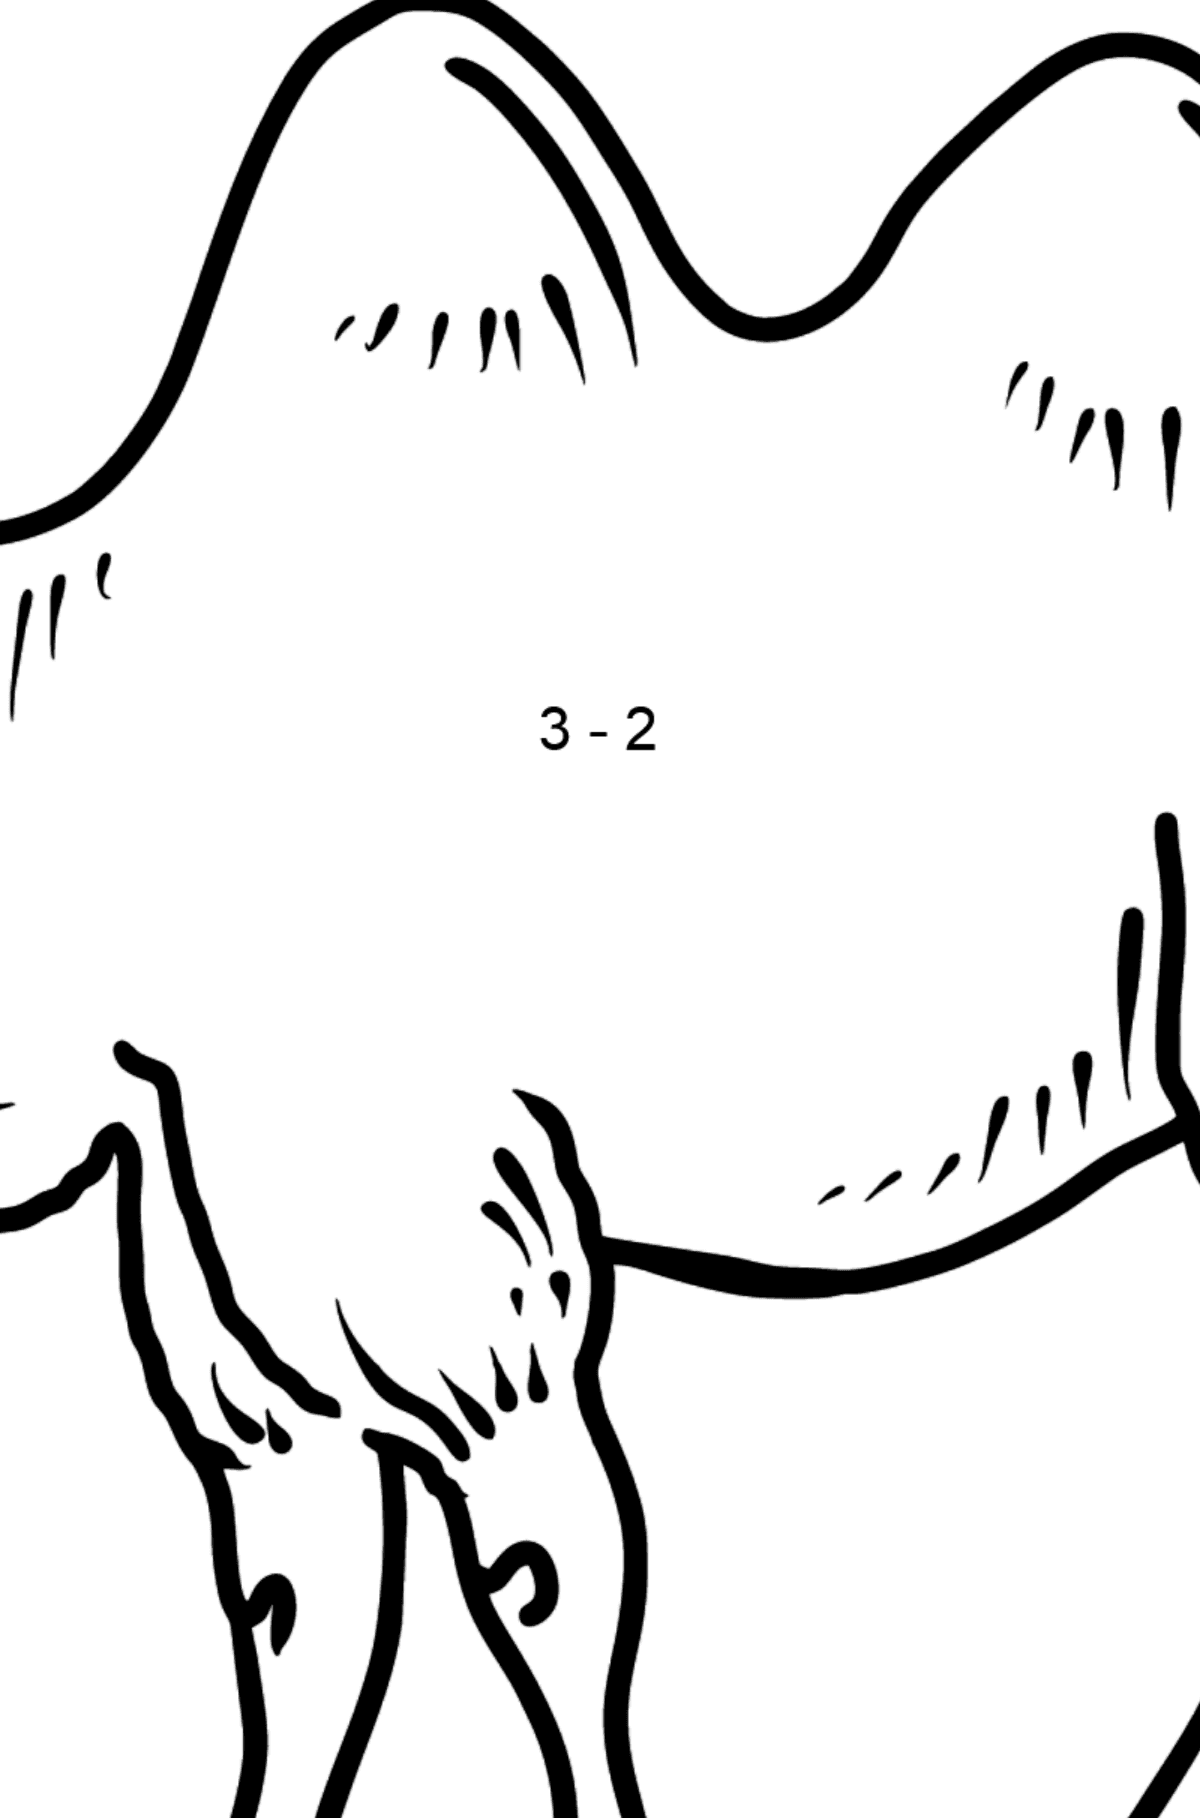 Camel coloring page - Math Coloring - Subtraction for Kids